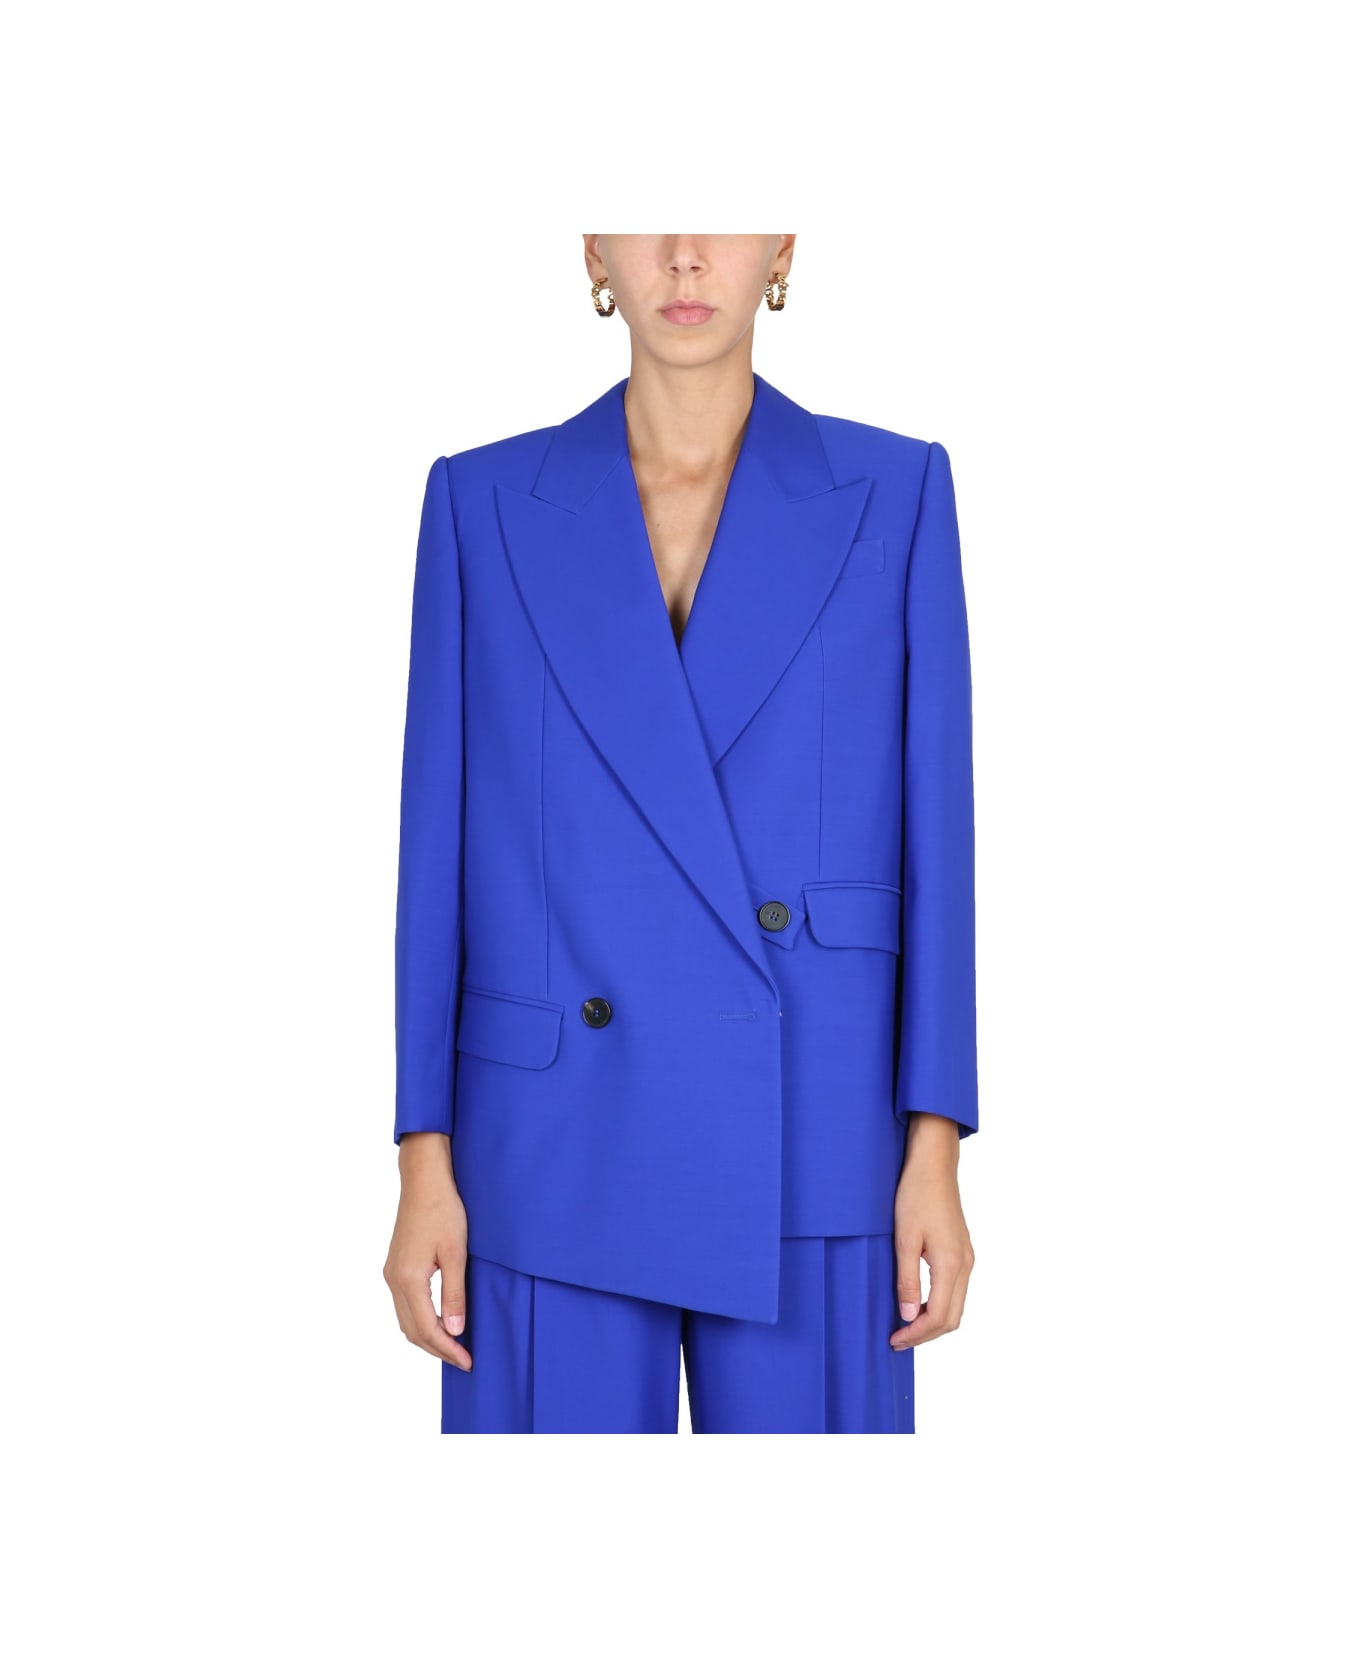 Alexander McQueen Structured Double-breasted Jacket - BLUE ジャケット